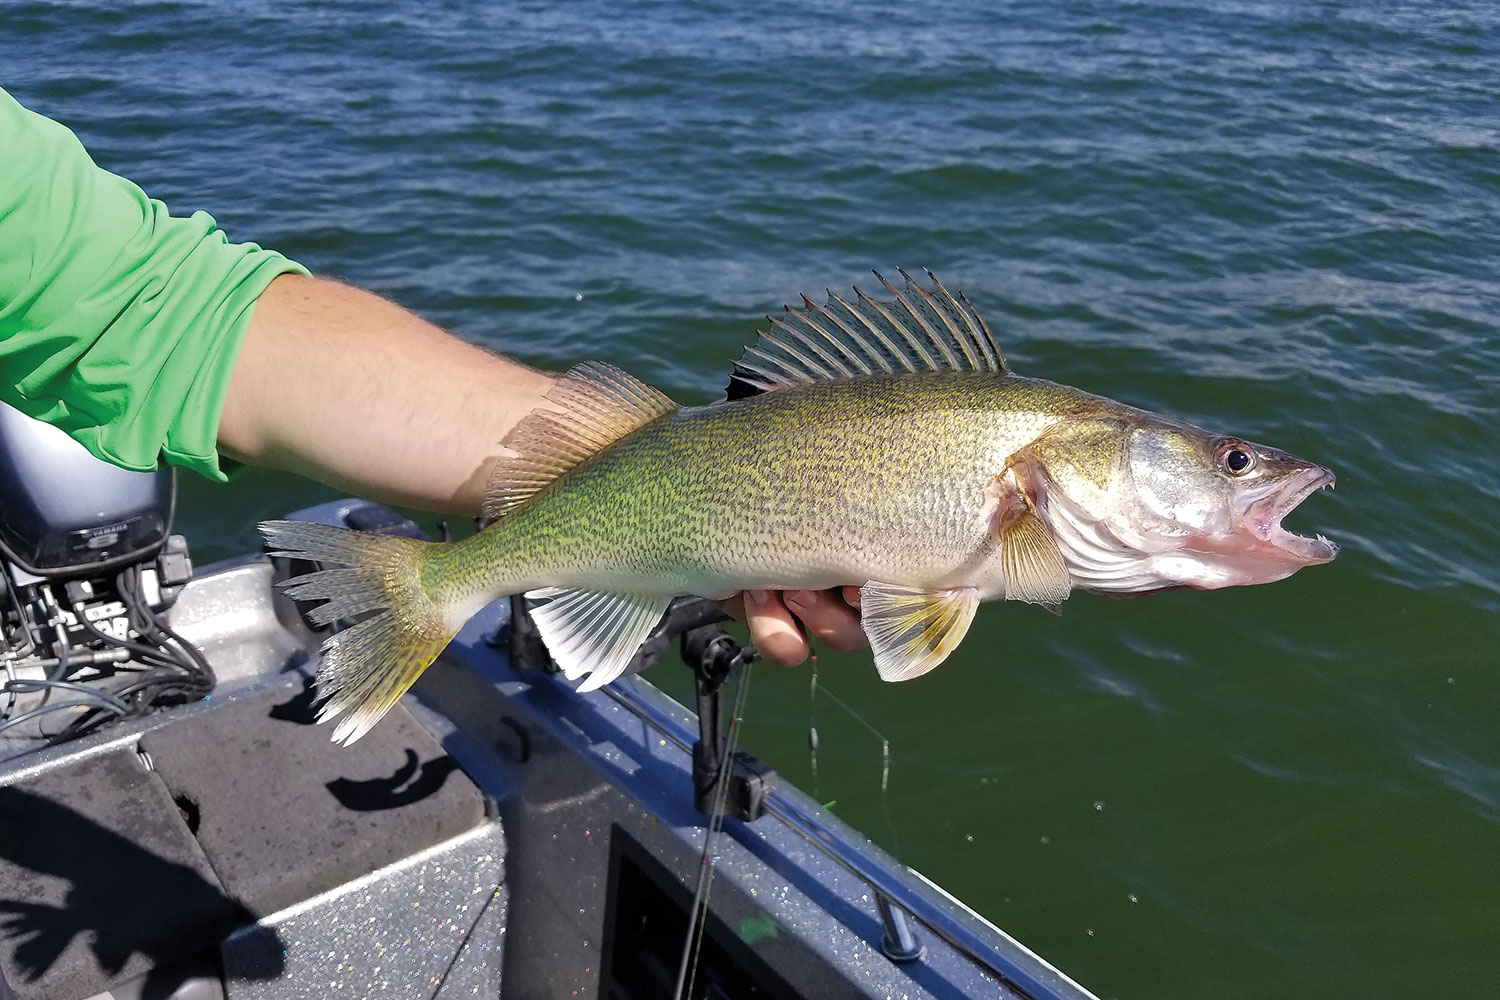 Angler holding a walleye